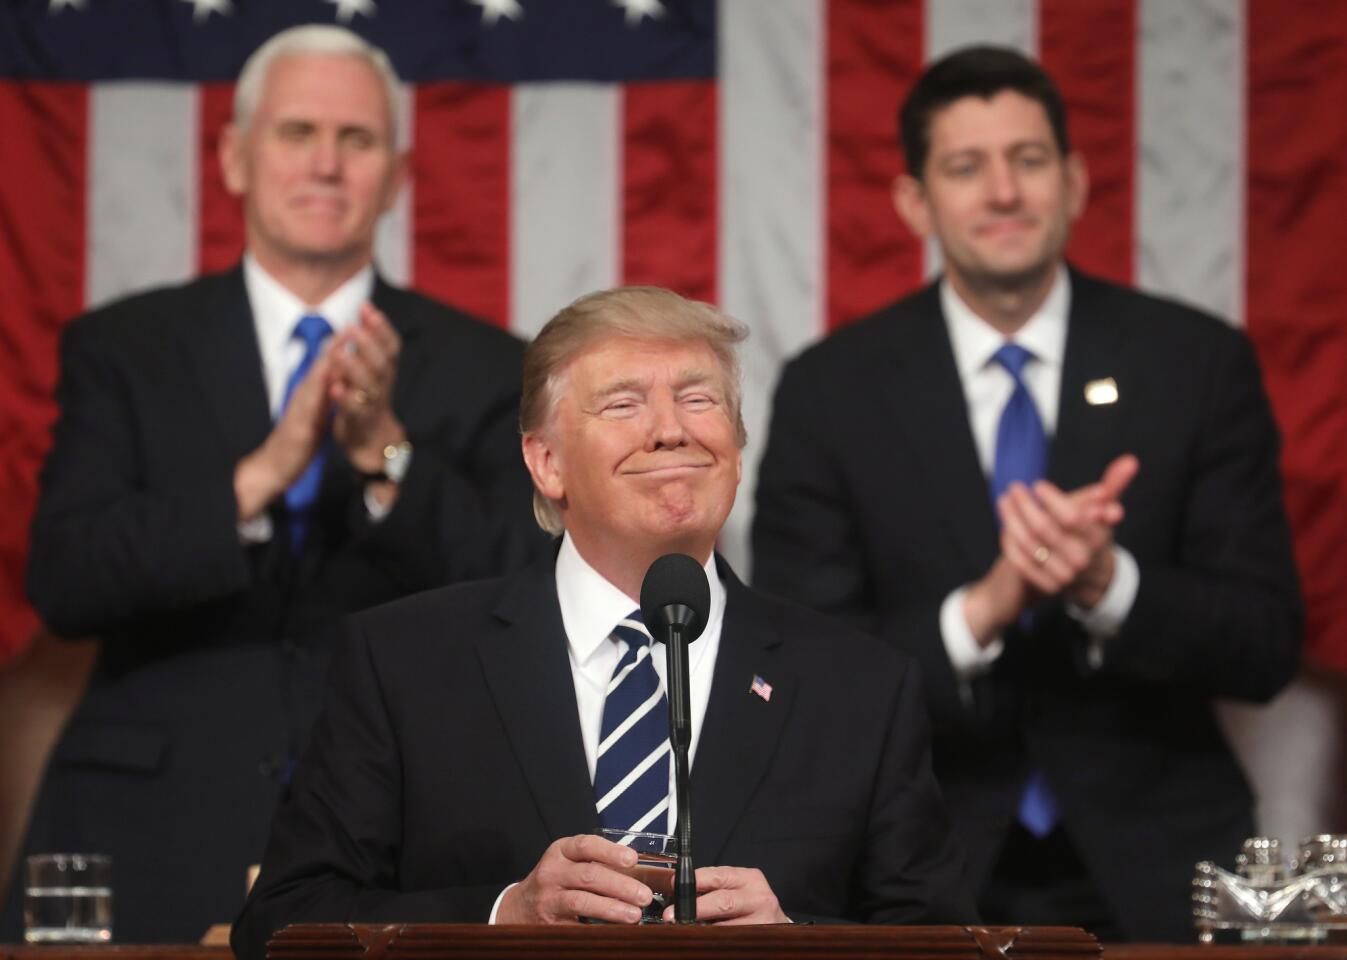 President Donald Trump delivers a speech before Congress as Vice President Mike Pence and House Speaker Paul Ryan applaud Feb. 28, 2017.